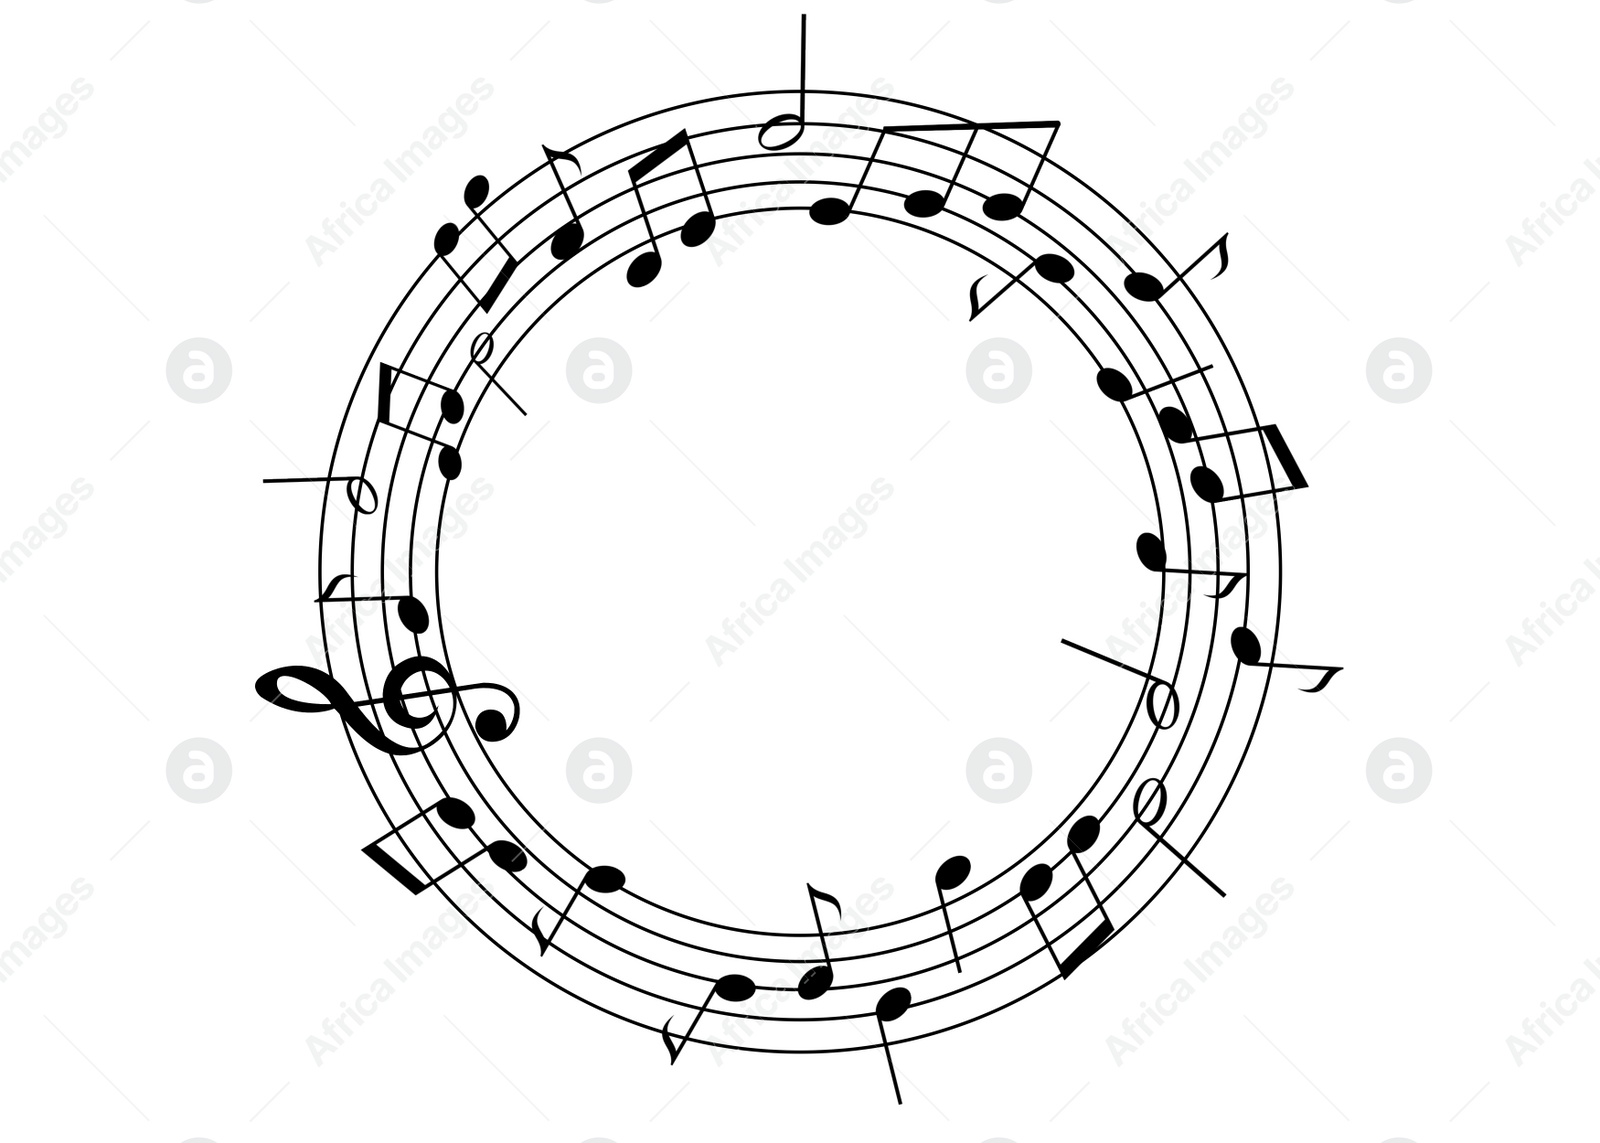 Illustration of Frame of staff with treble clef and musical notes on white background